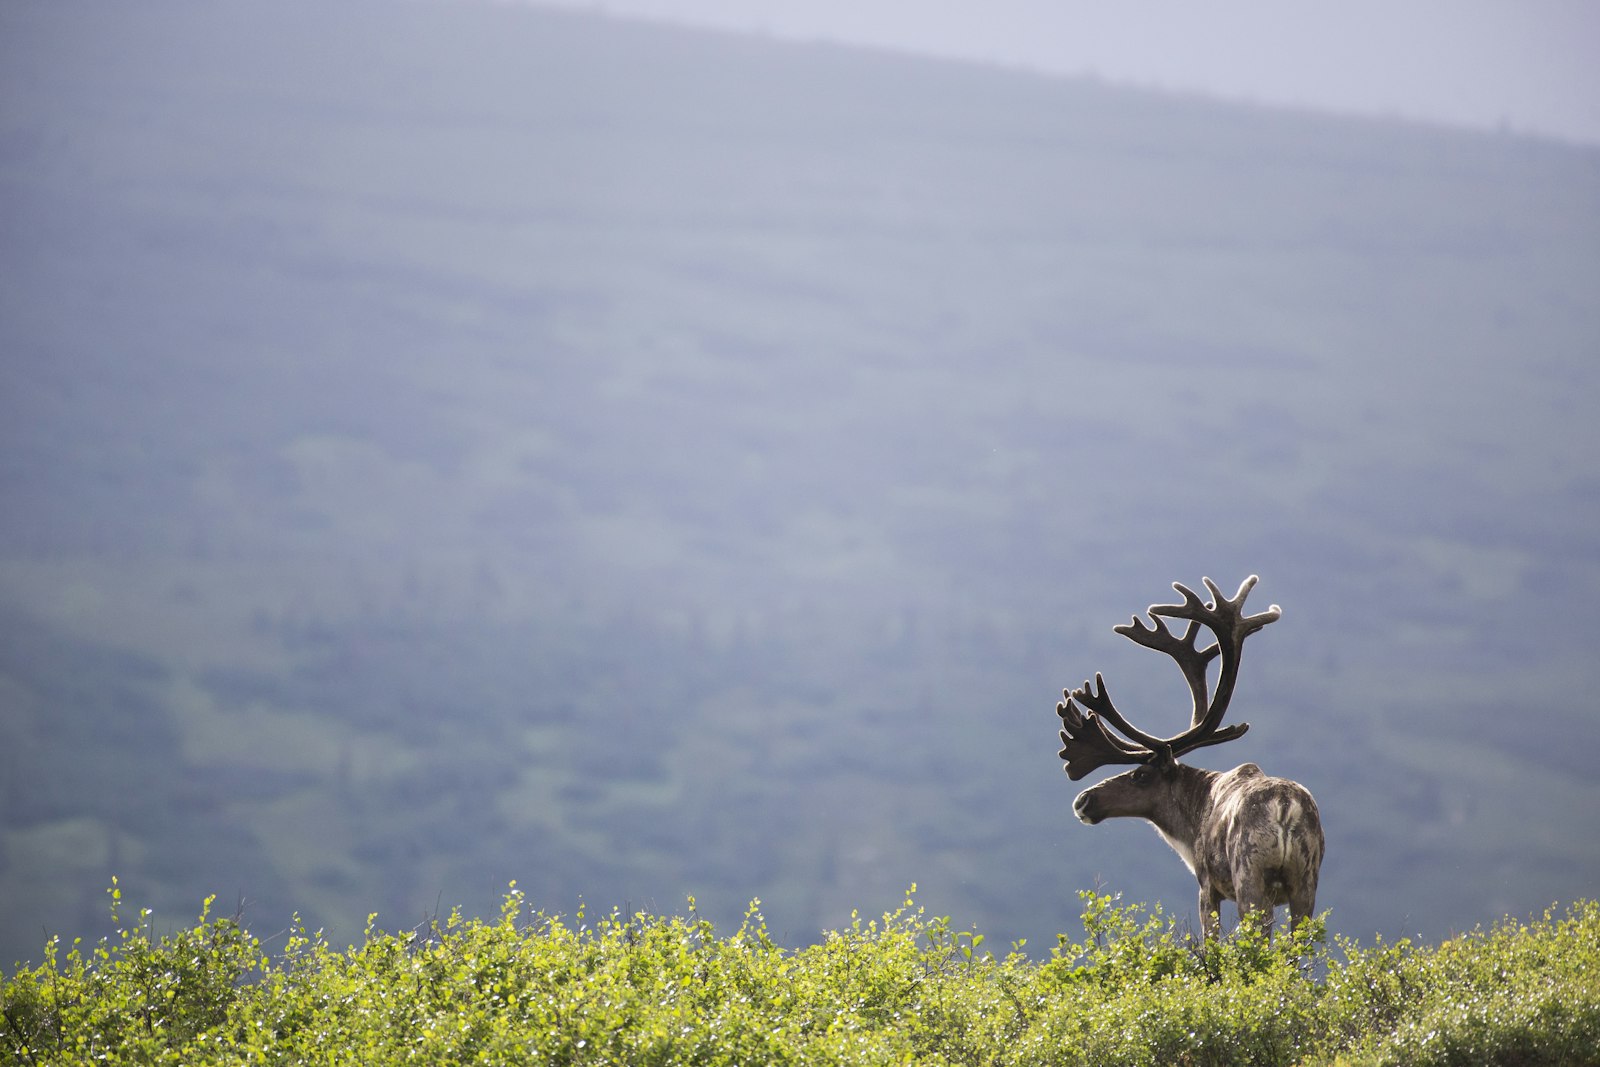 A caribou against a mountainous background